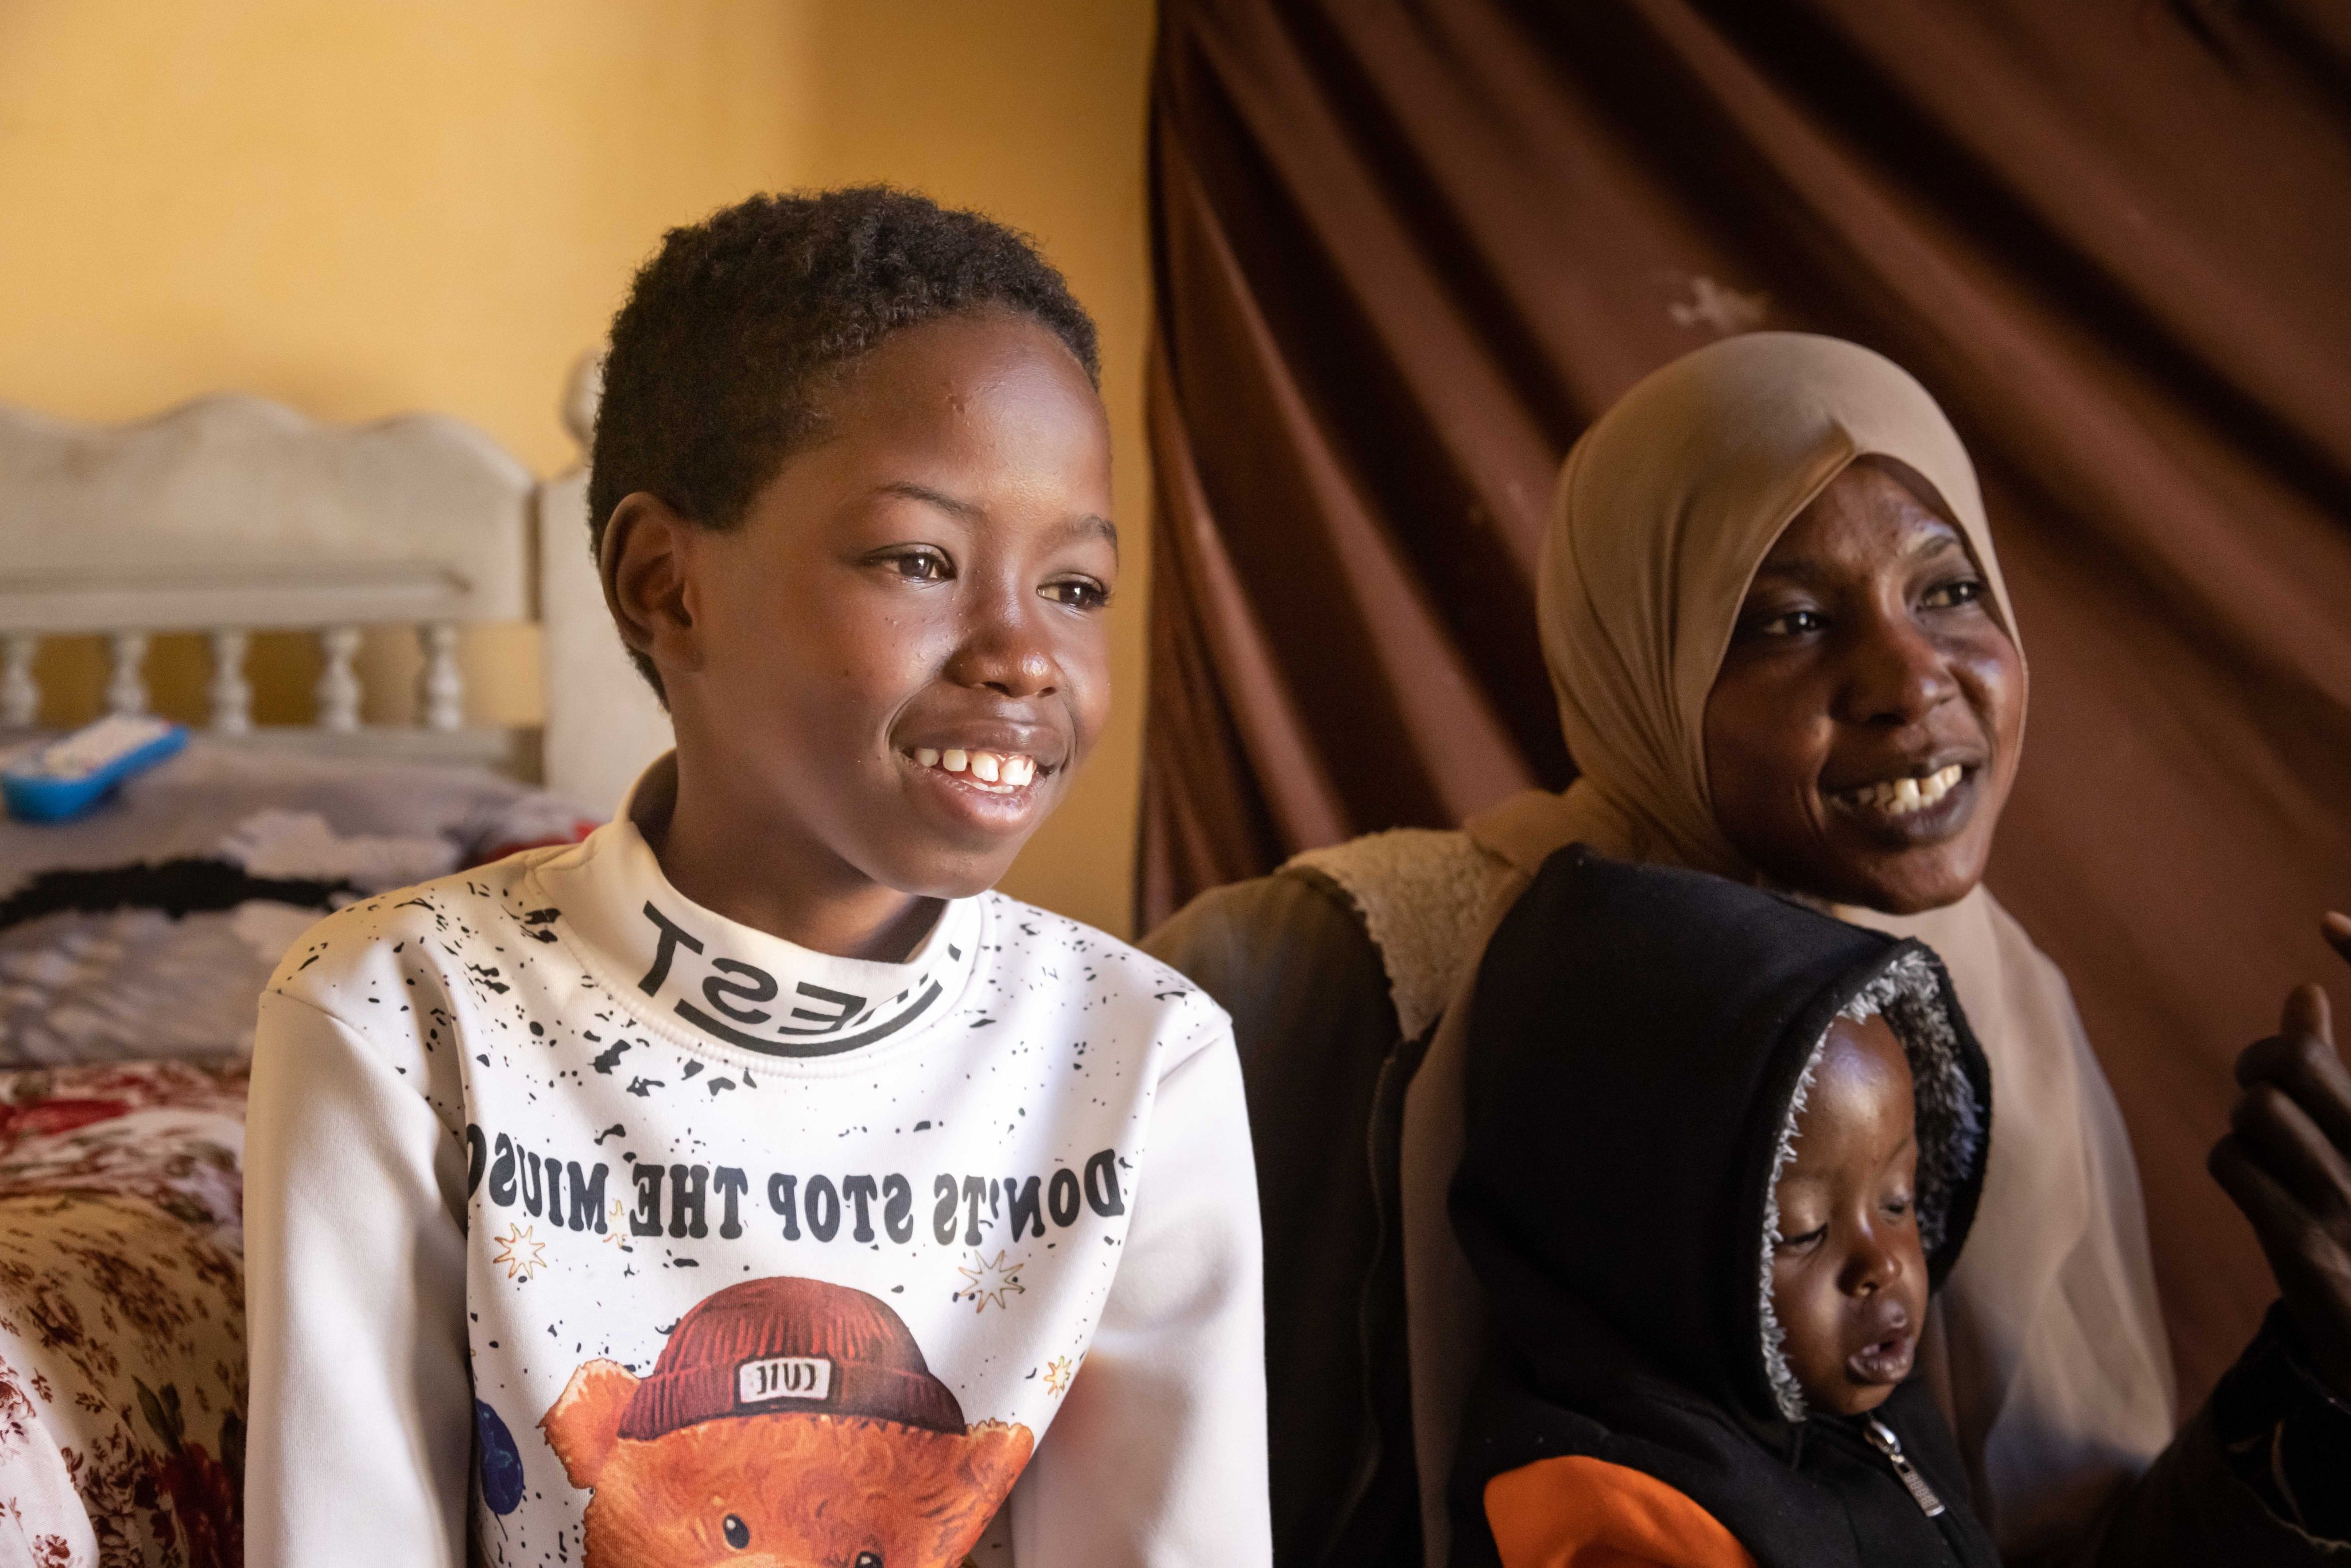 Asaad, 13, and his mother and brother in their home in Cairo, Egypt.